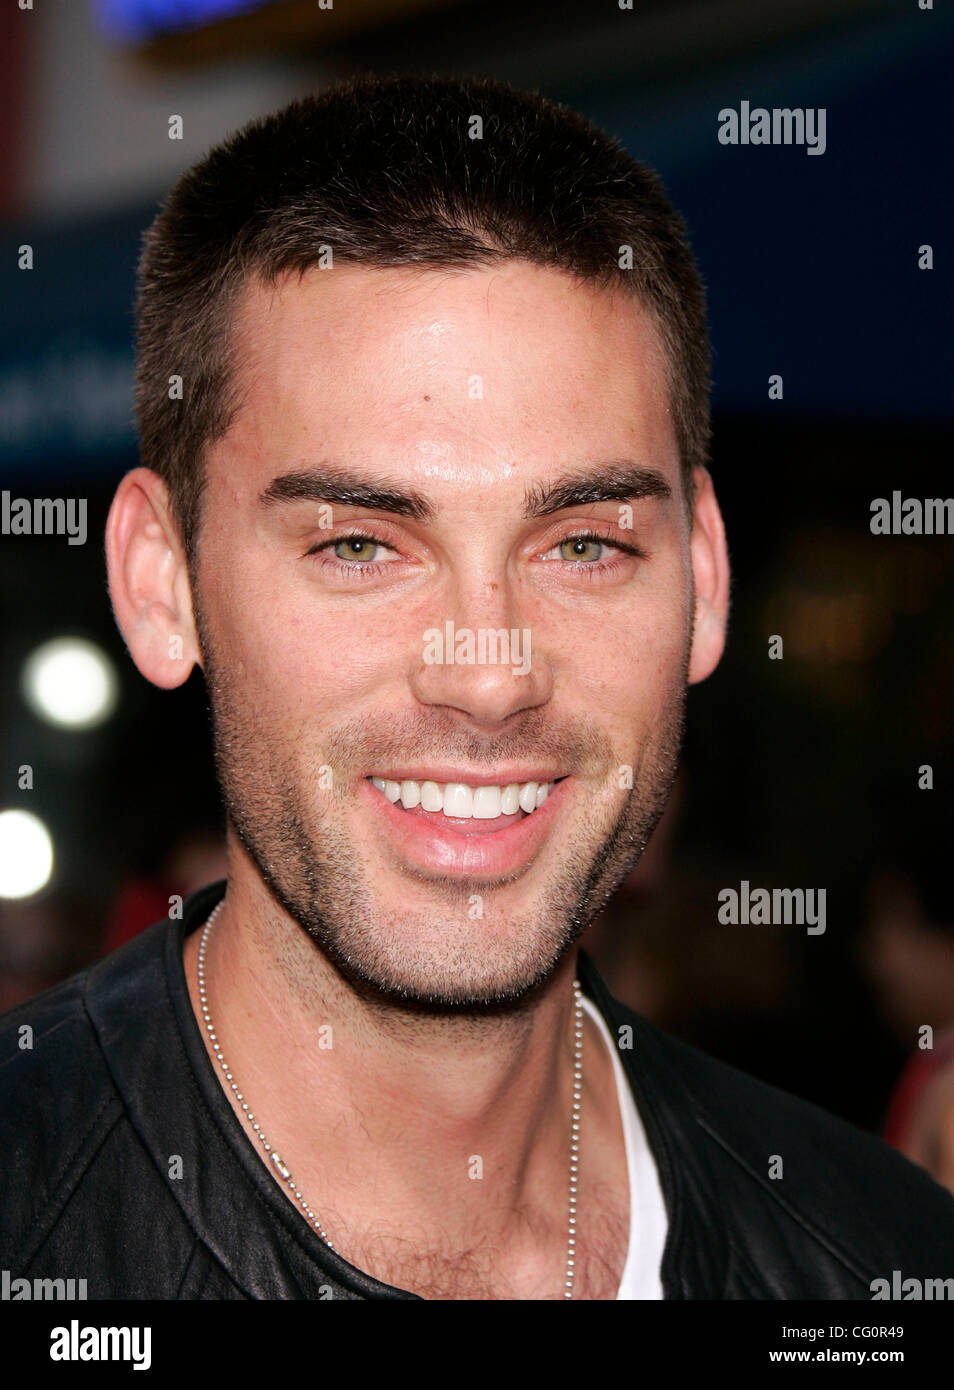 Jul 12,2007; Hollywood, California, USA; Actor DREW FULLER at the 'I Now Pronounce You Chuck & Larry' World Premiere held at the Gibson Ampitheatre. Mandatory Credit: Photo by Lisa O'Connor/ZUMA Press. (©) Copyright 2007 by Lisa O'Connor Stock Photo